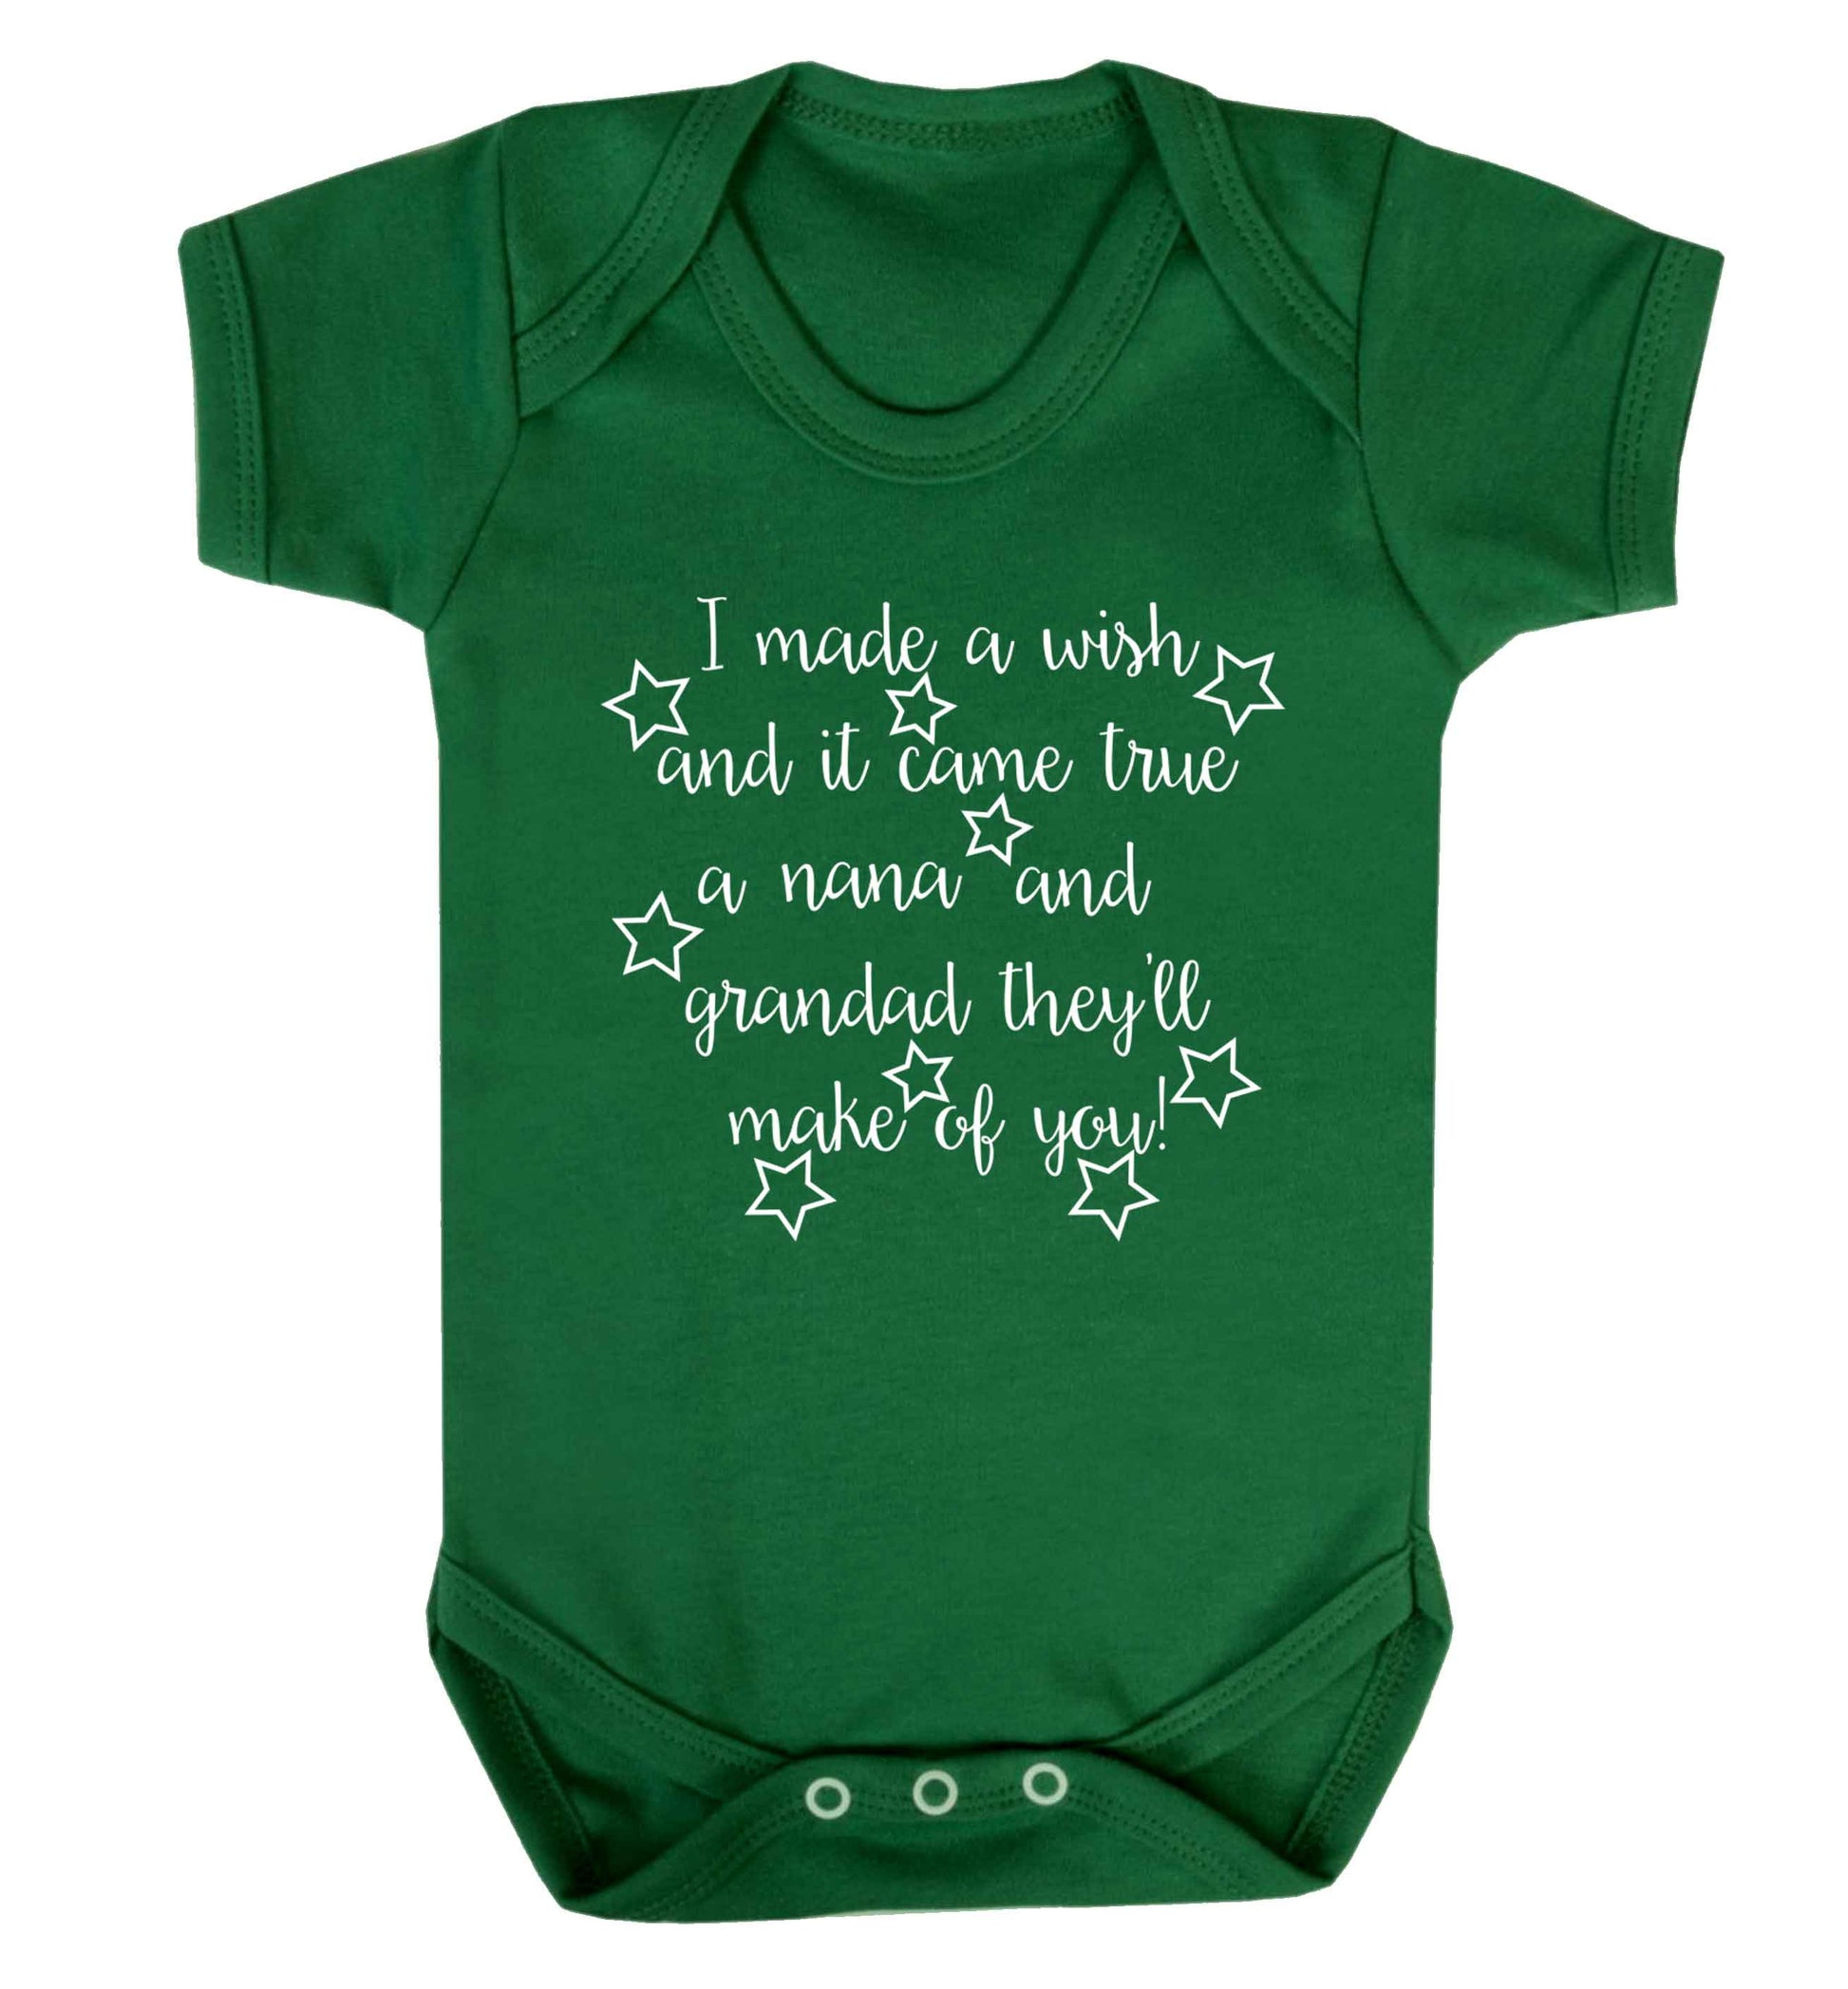 I made a wish and it came true a nana and grandad they'll make of you! Baby Vest green 18-24 months